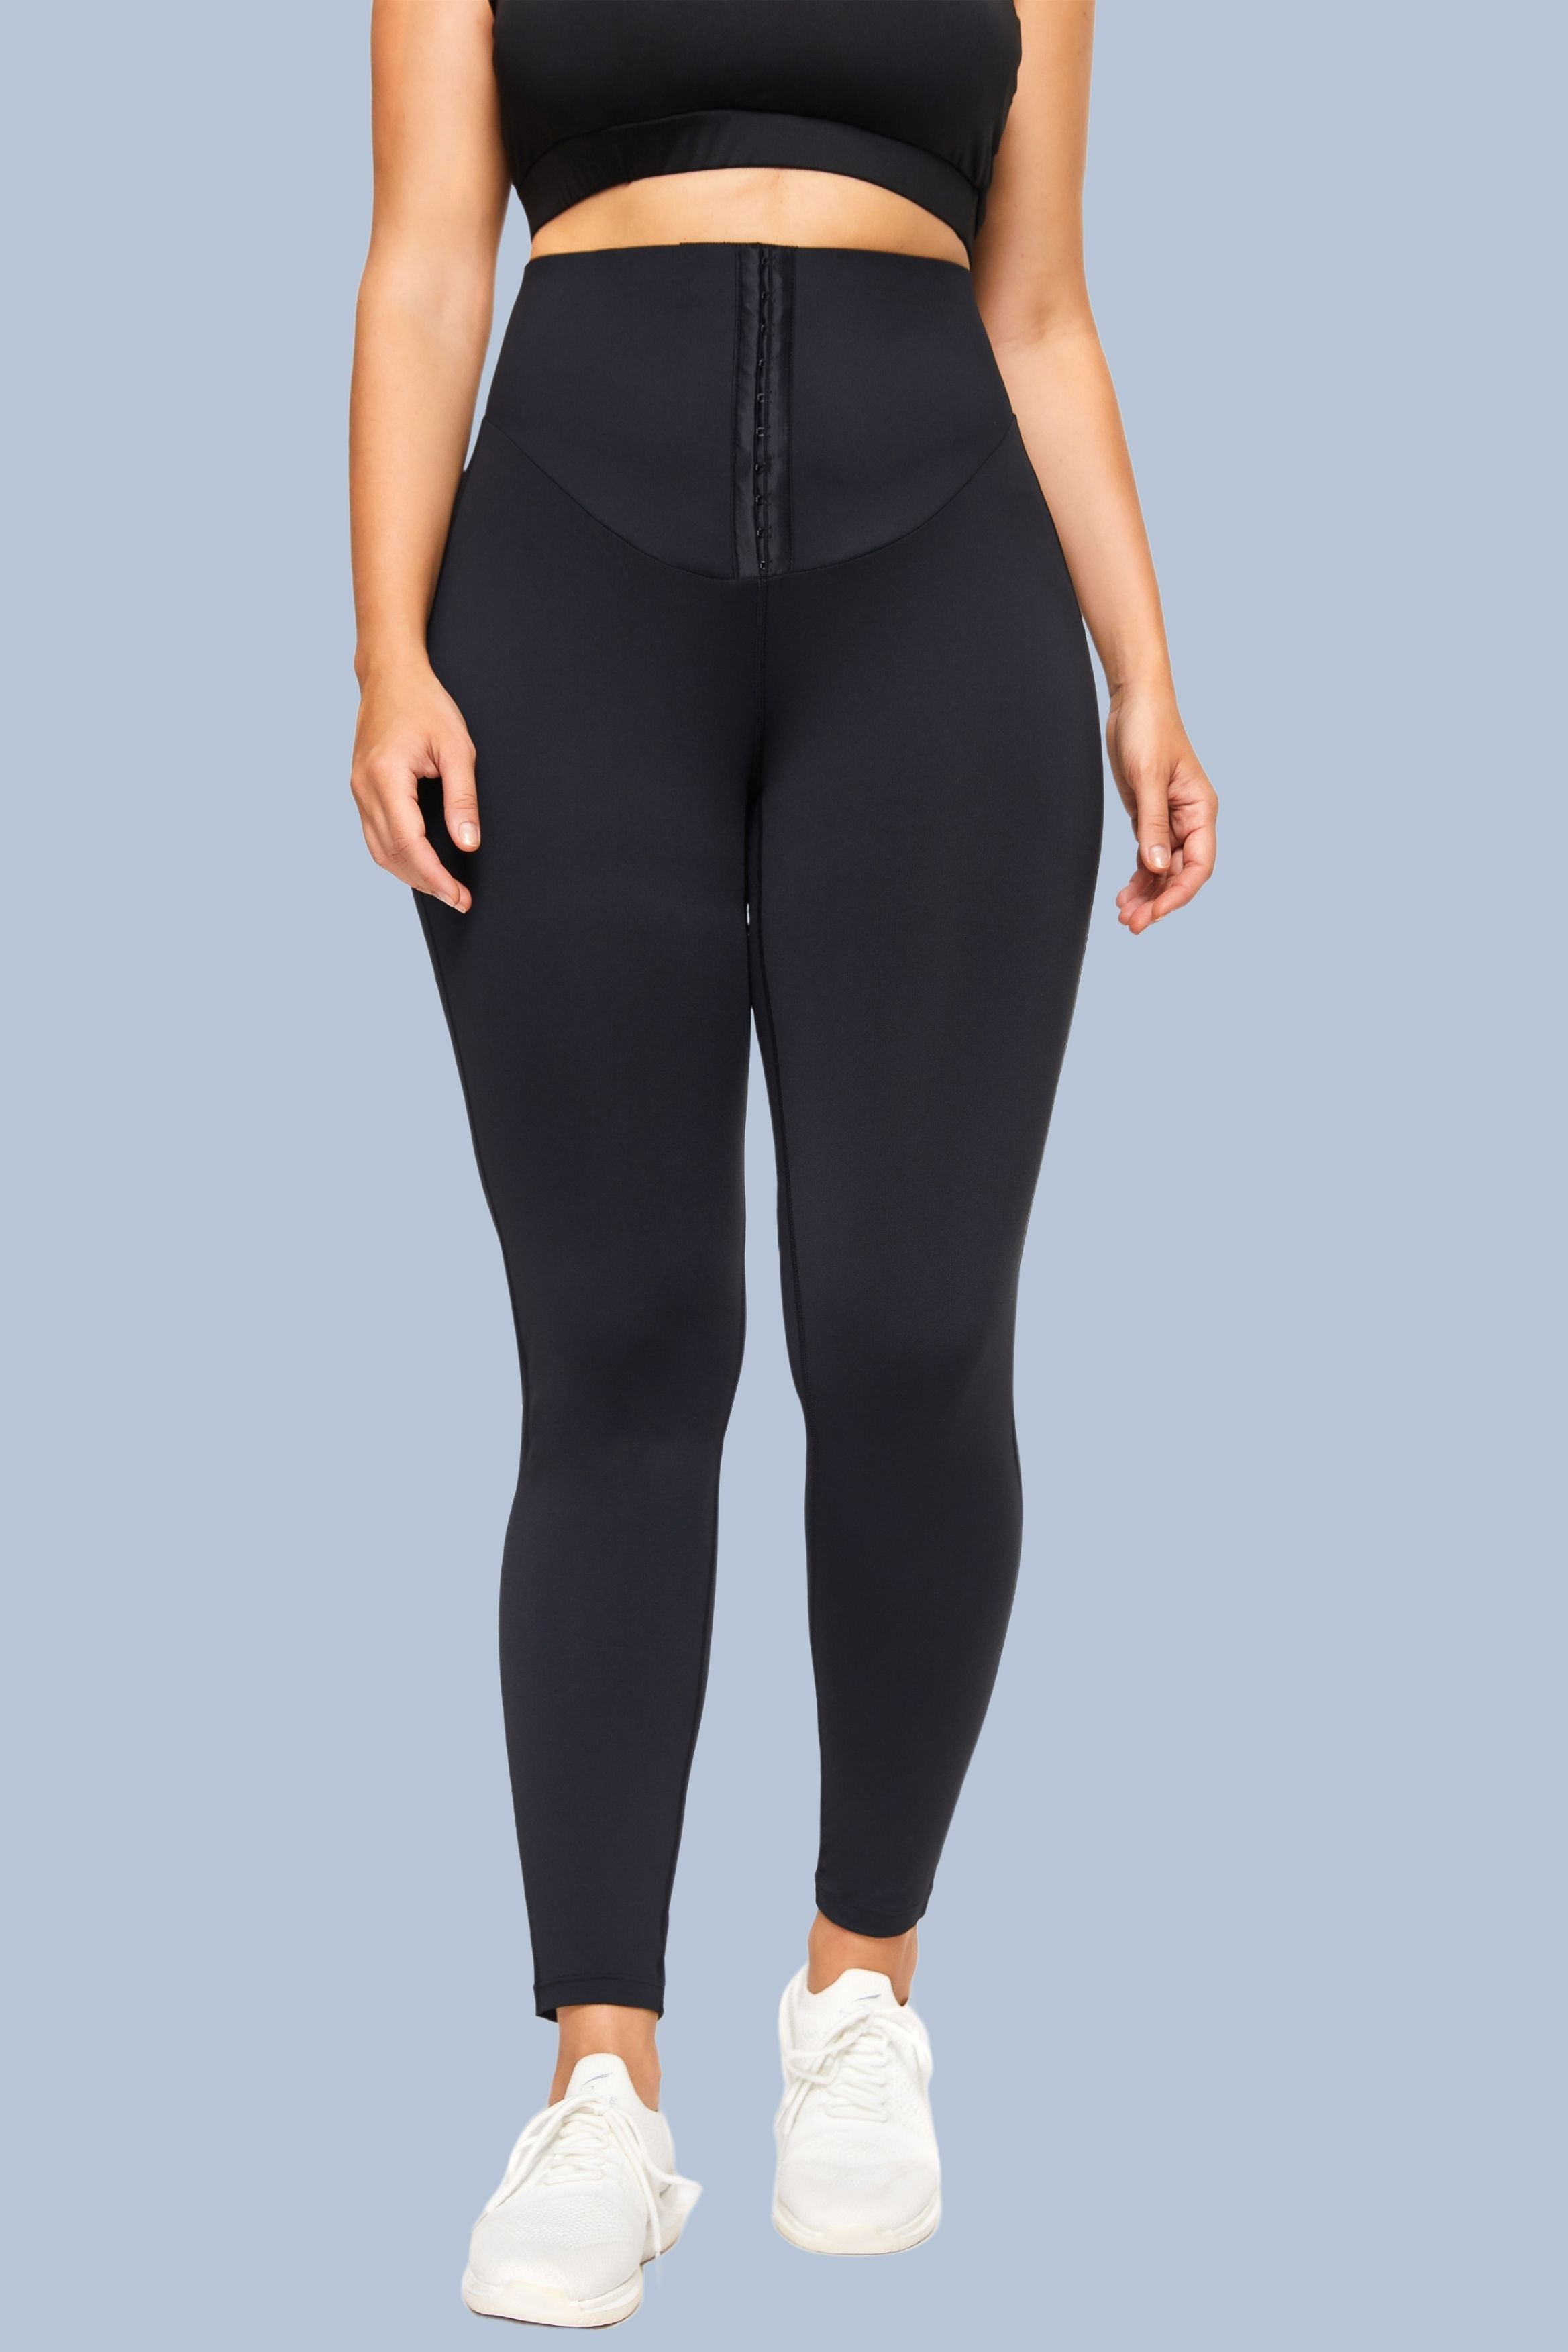 Plus Size/extended Size, High Waisted Solid Black Leggings, Women's Leggings,  Daily Wear, Buttery Soft, Yoga, Comfort -  Norway